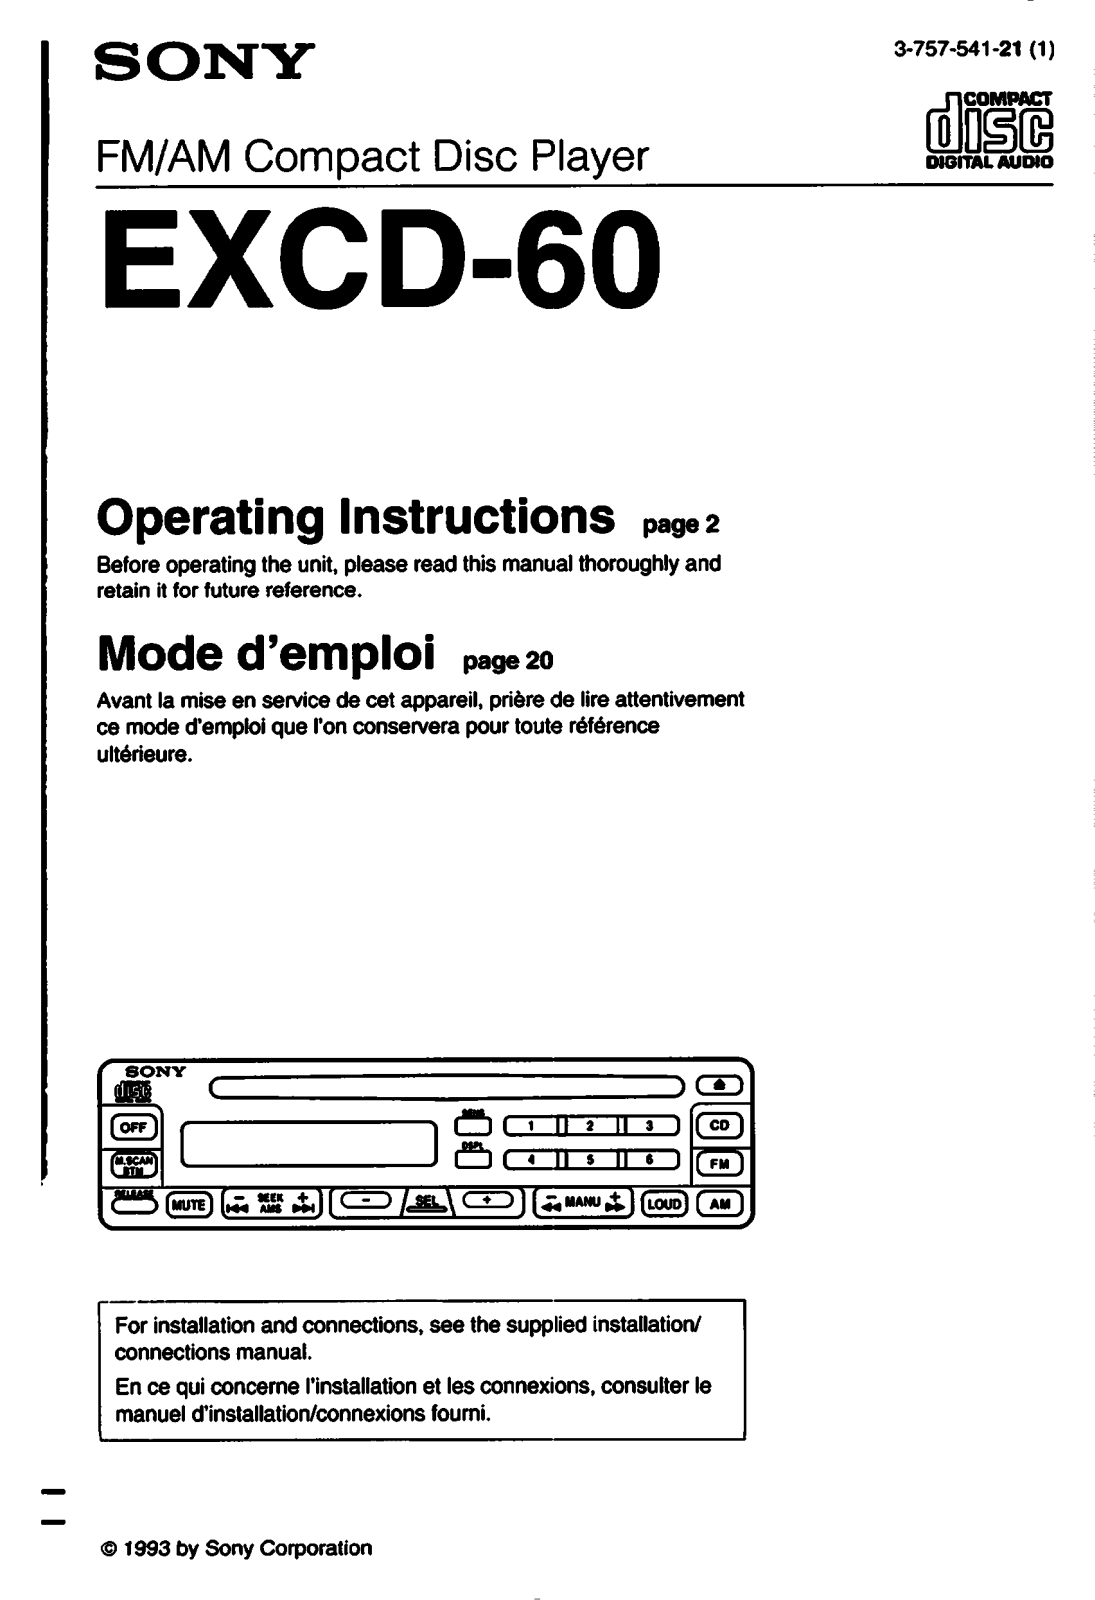 Sony EXCD60 Operating Manual